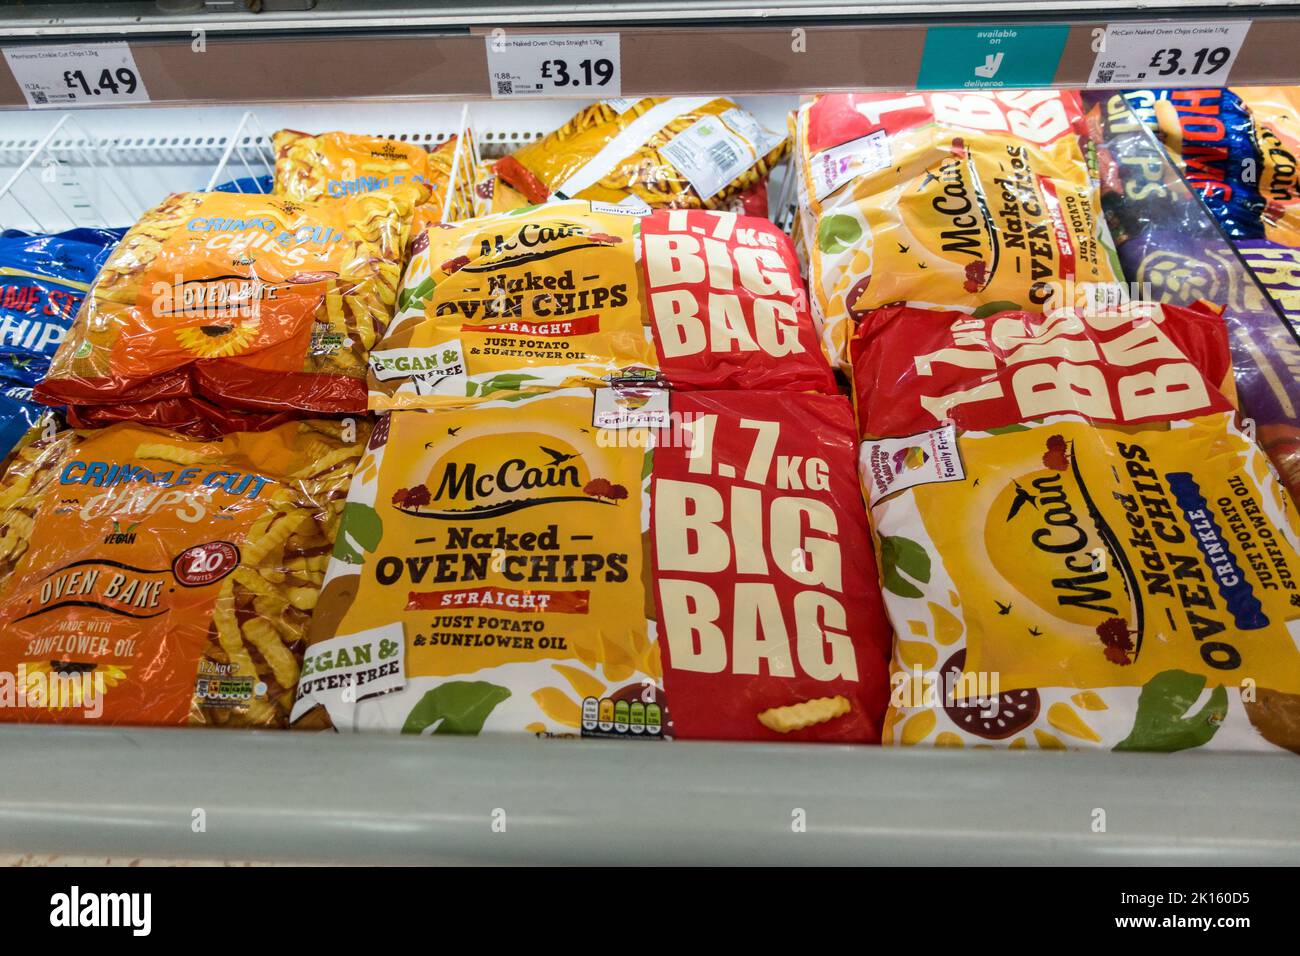 McCain Frozen chips in big bag at Supermarket Stock Photo